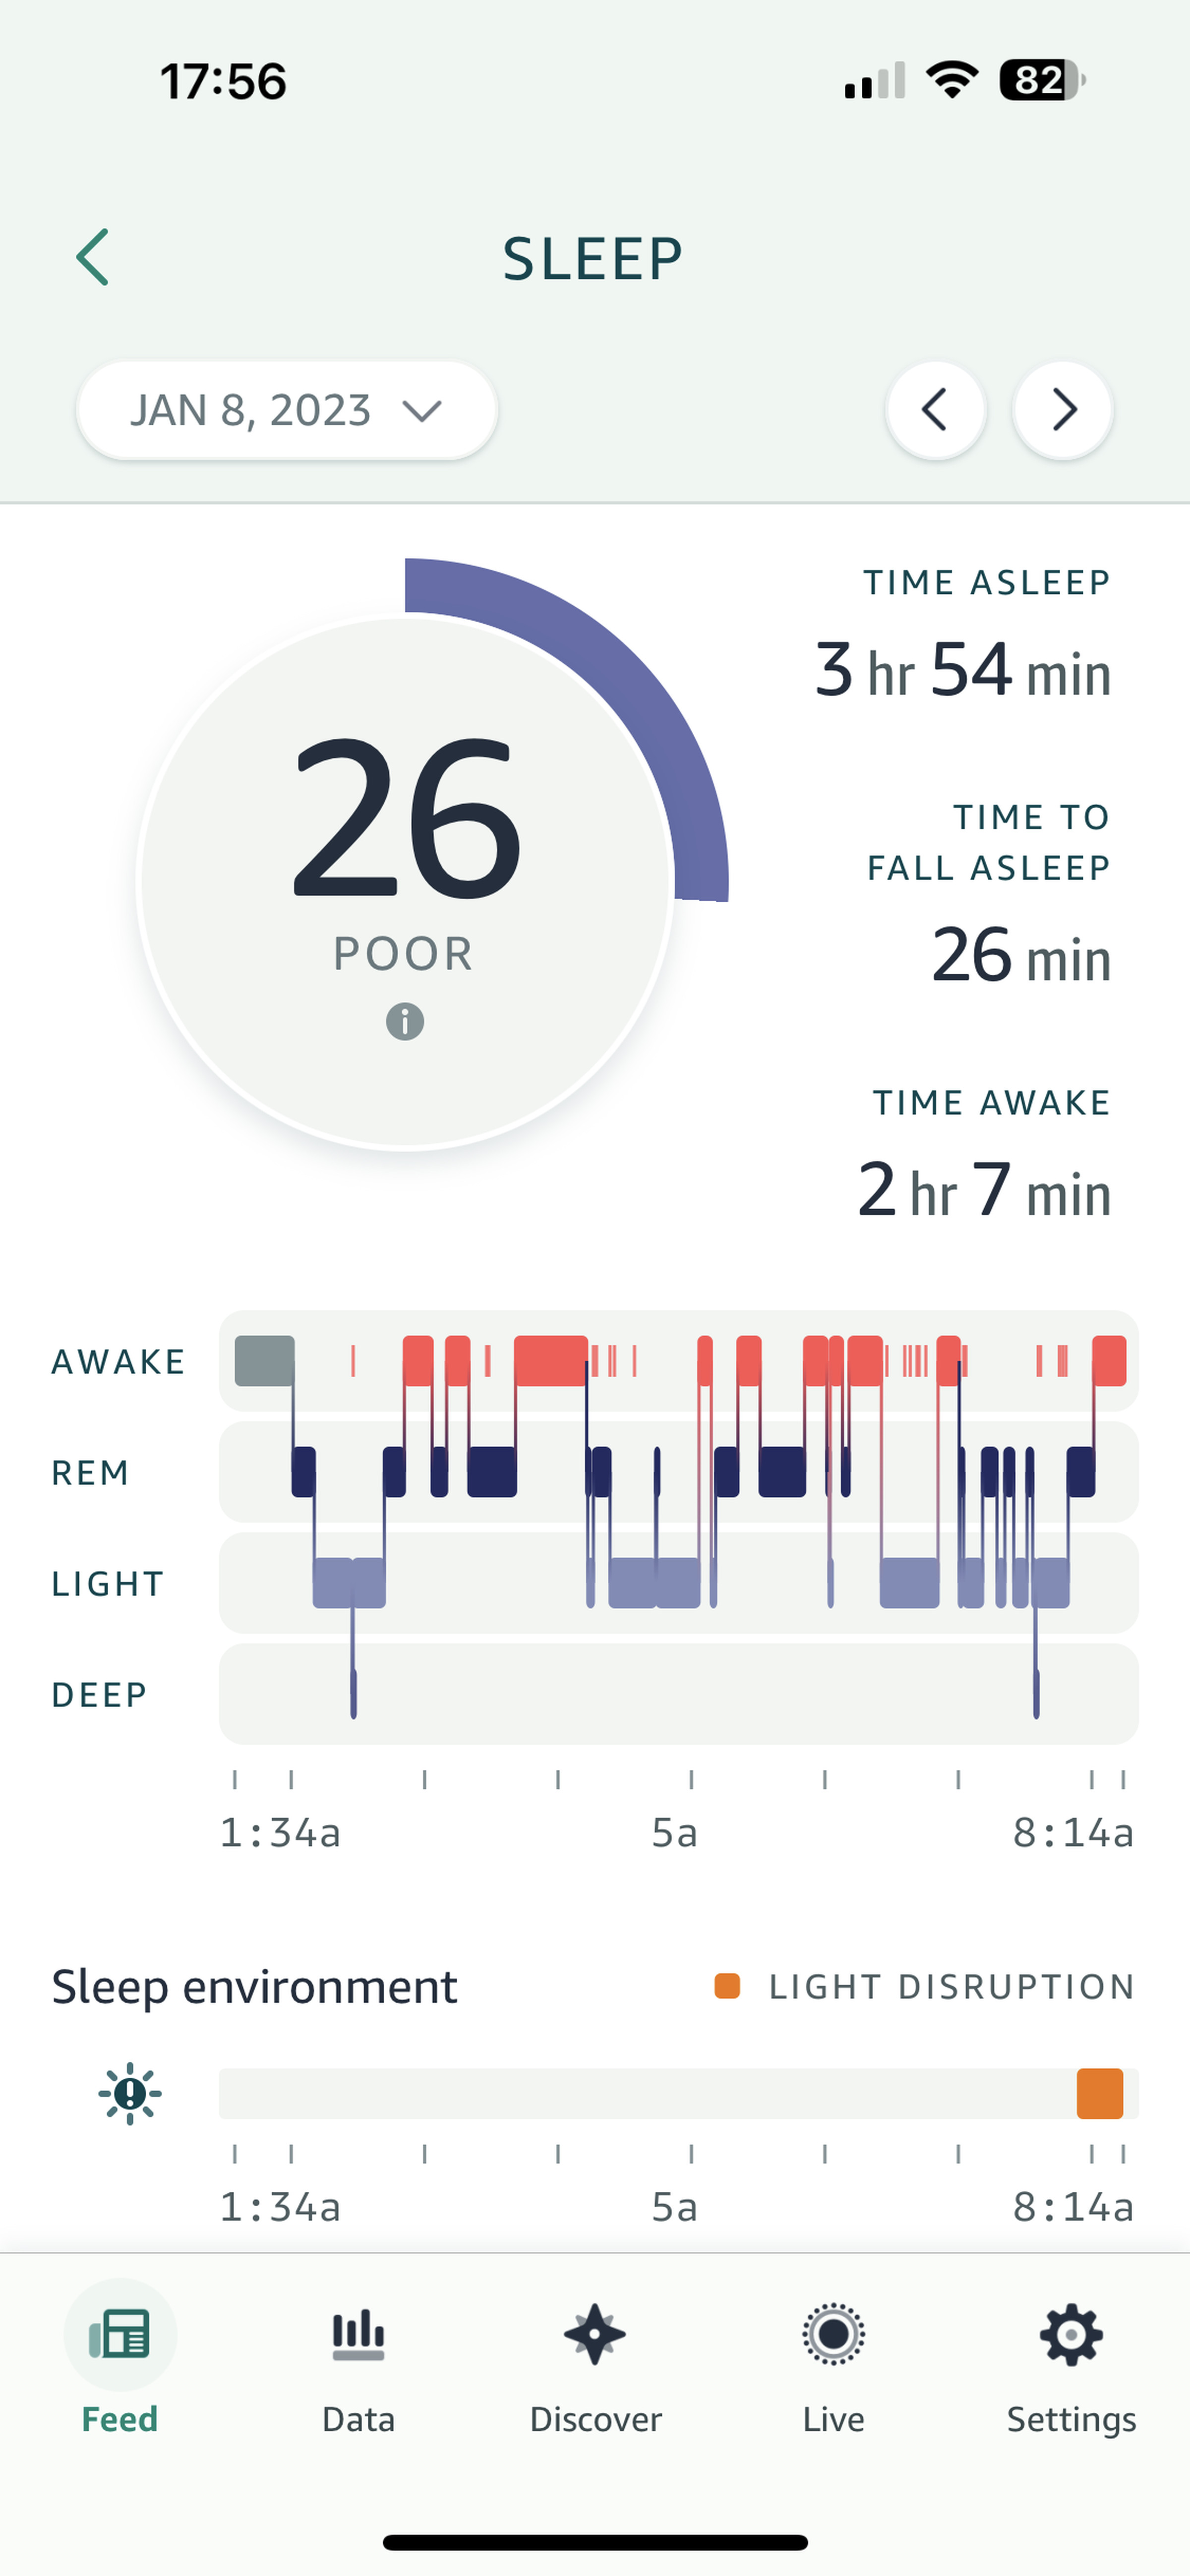 Several disruptions depicted in the Amazon Halo app with an awake time of 2 hours, 7 minutes